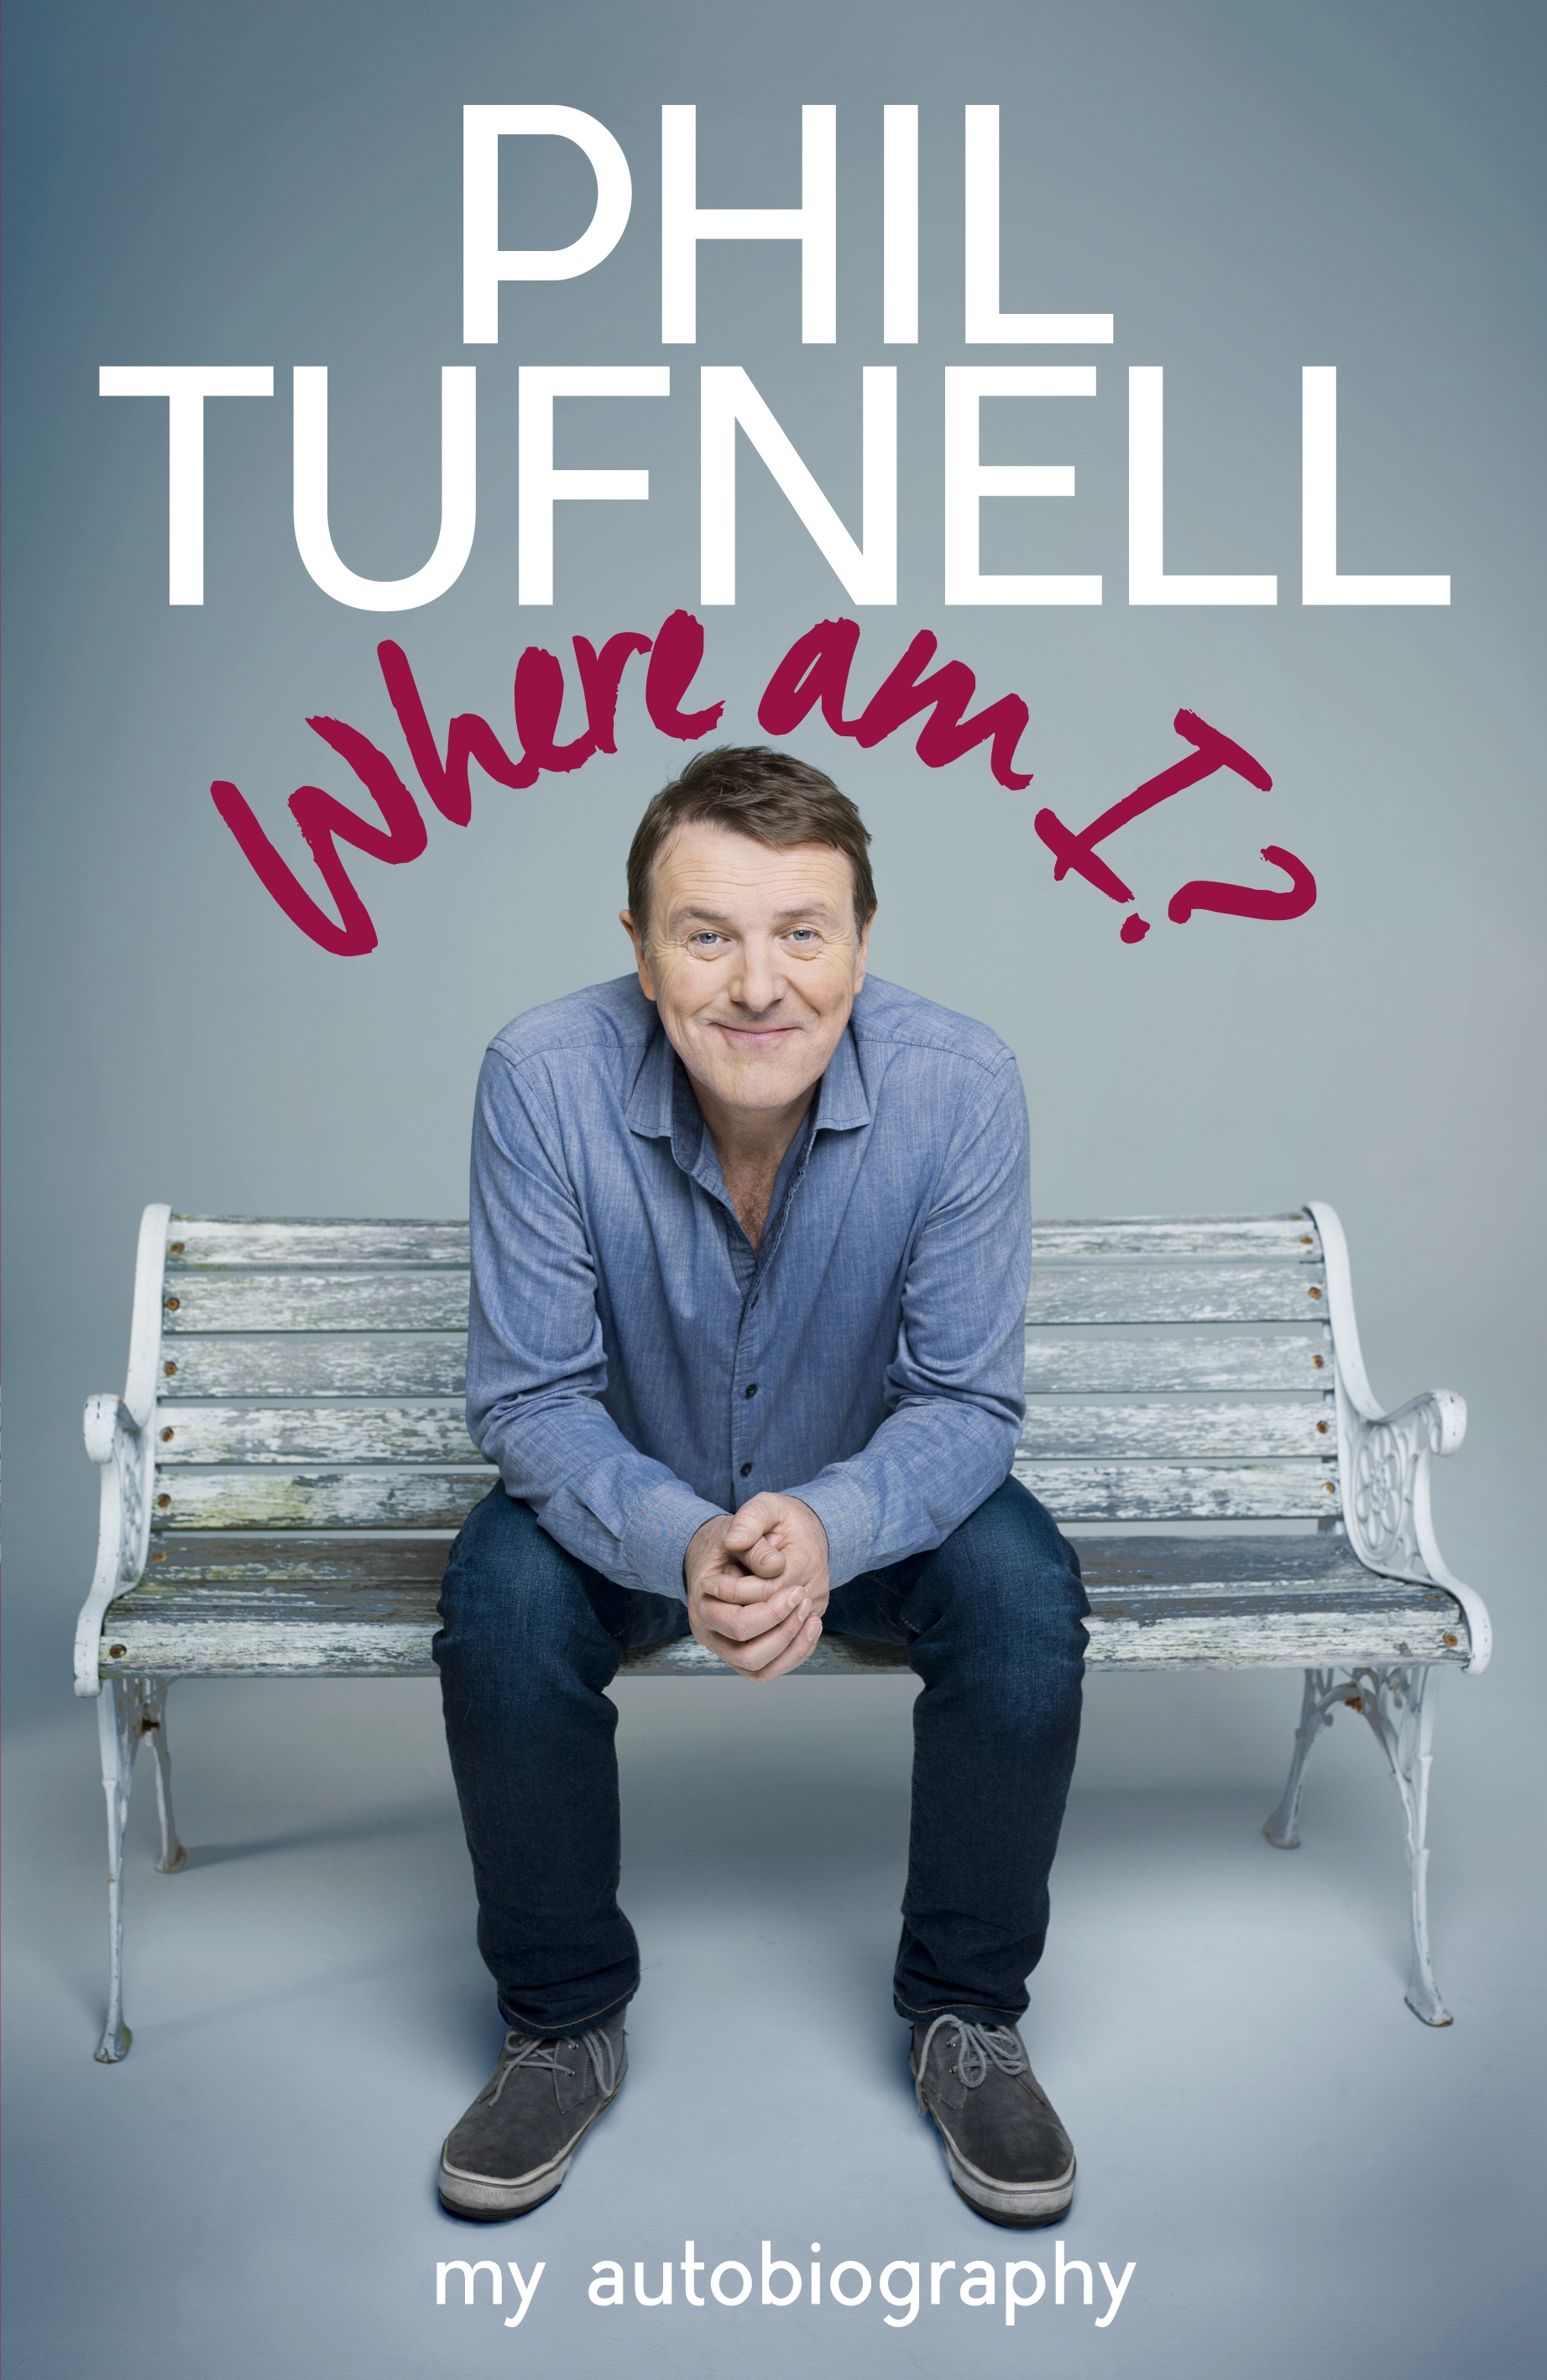 Phil Tufnell - Where Am I?